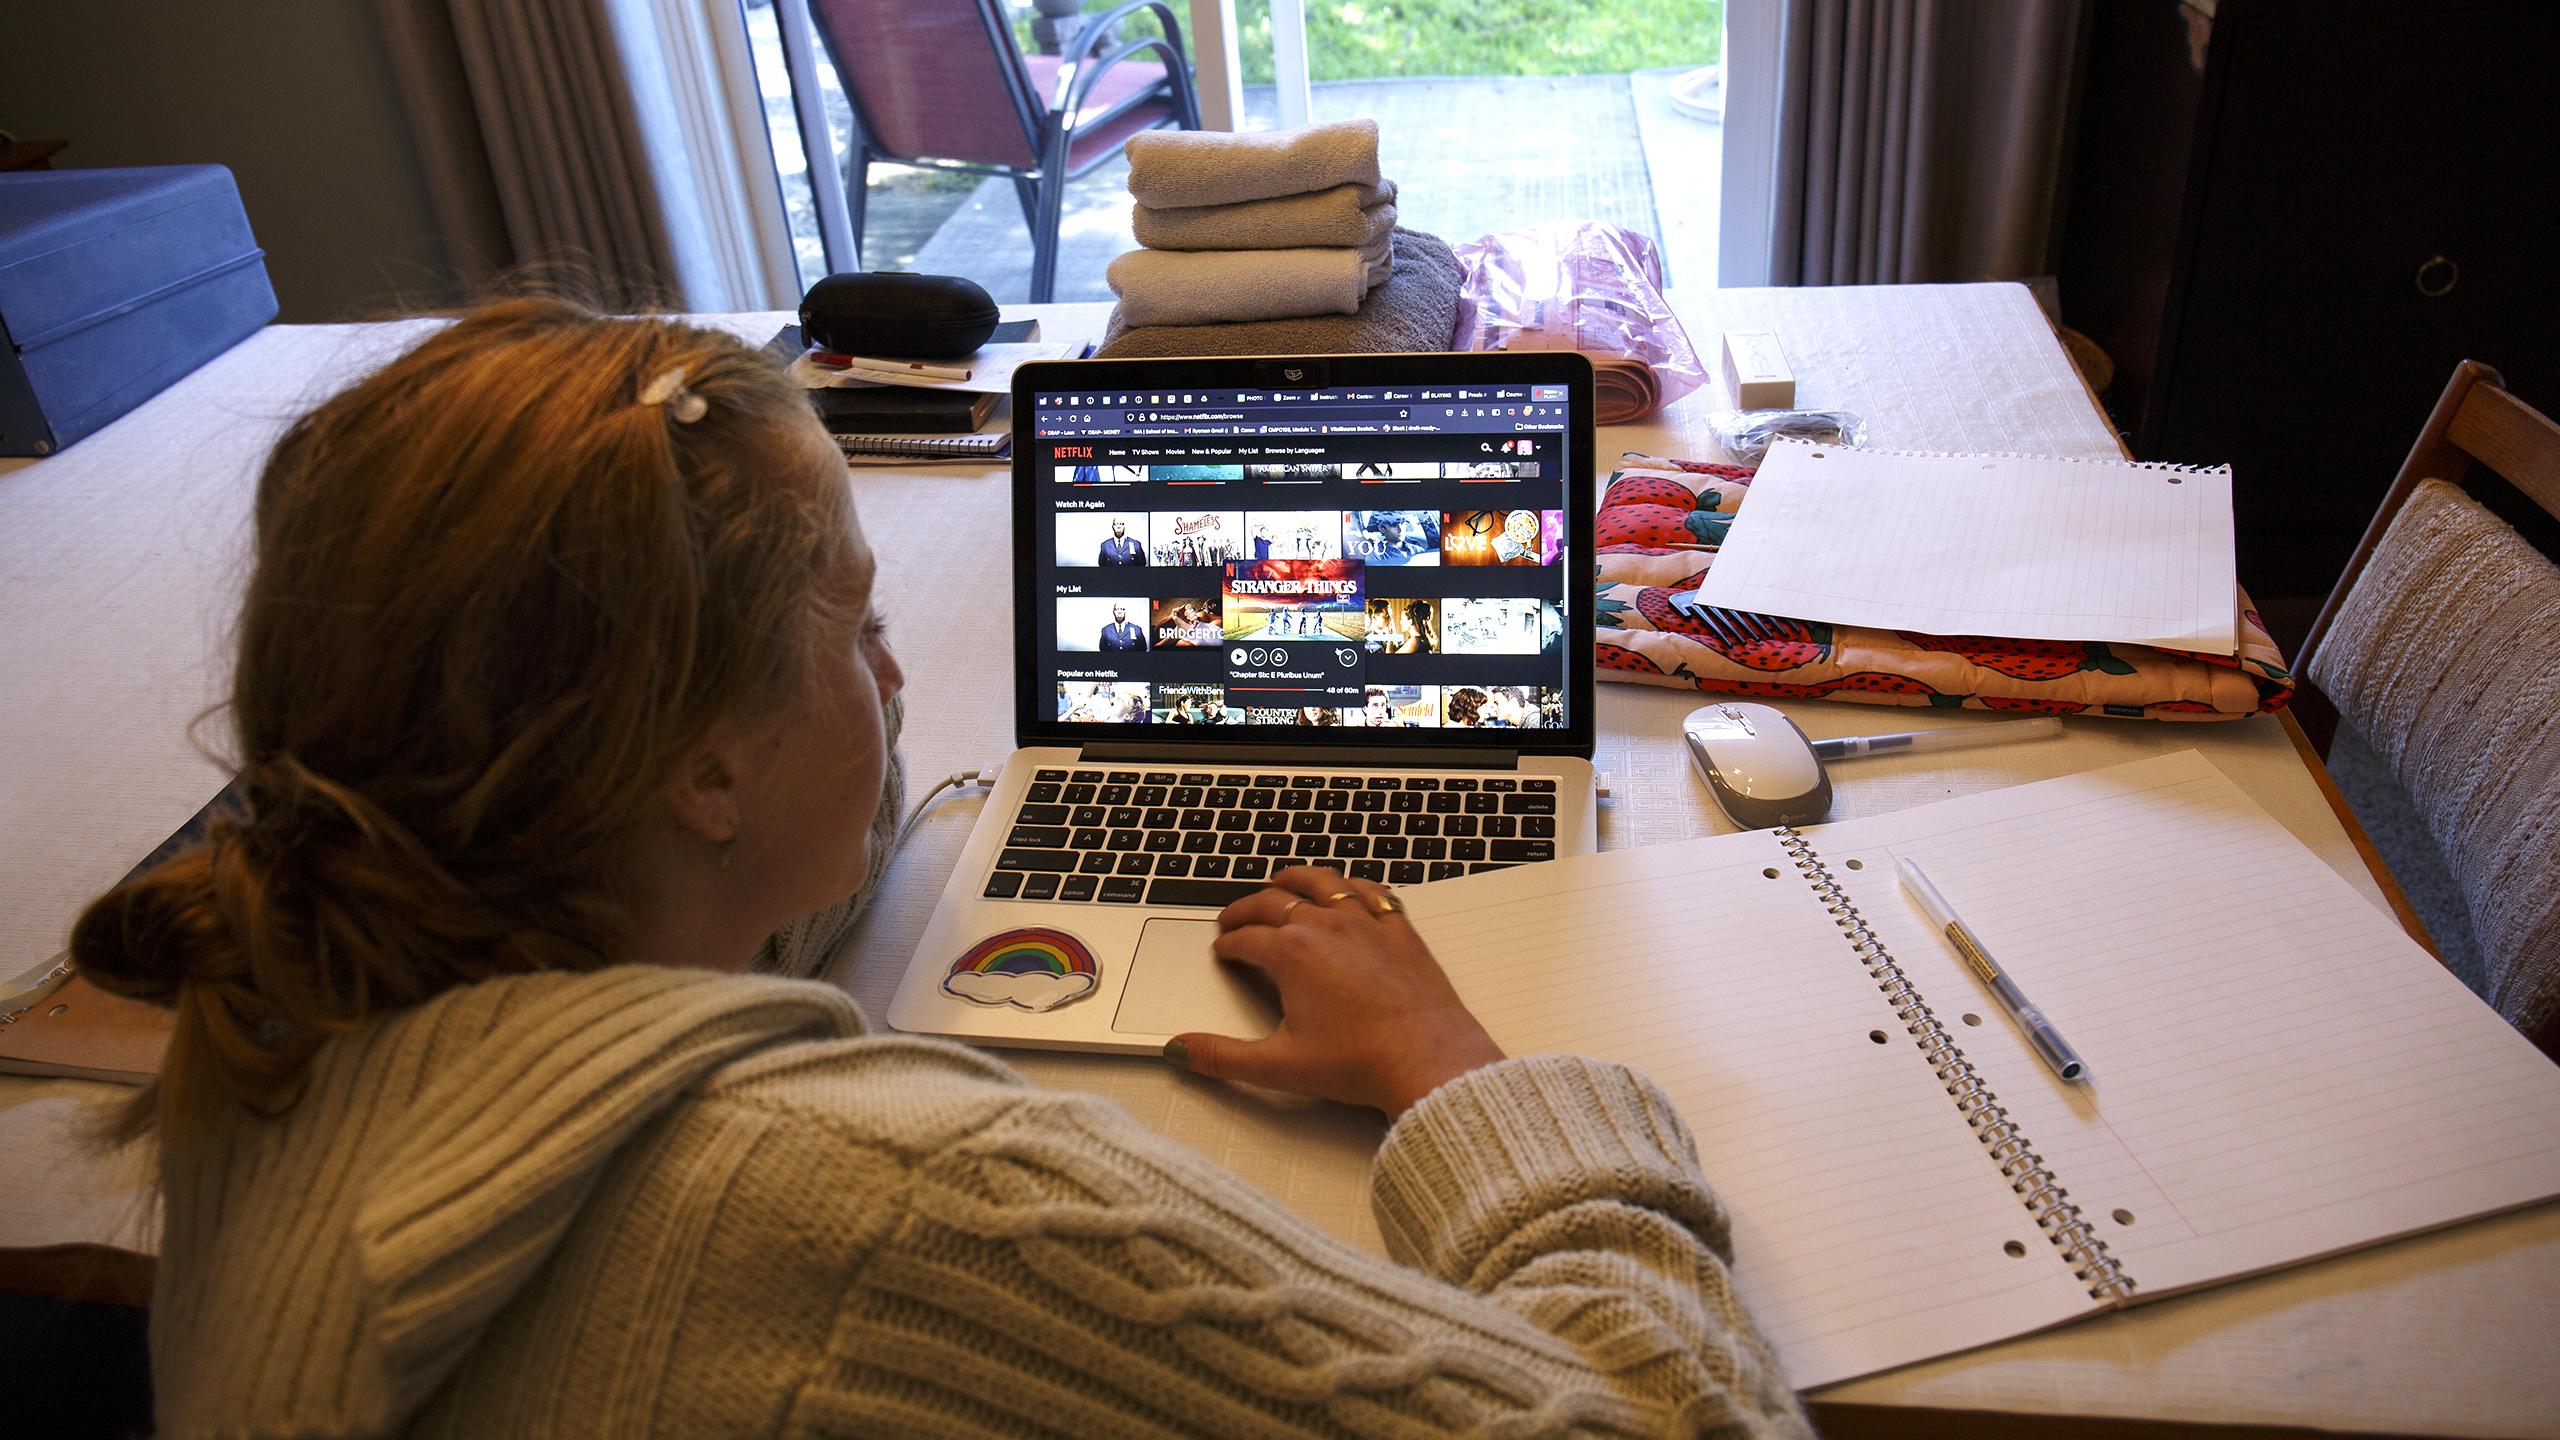 A student becomes distracted away from midterm prep and begins scrolling on Netflix